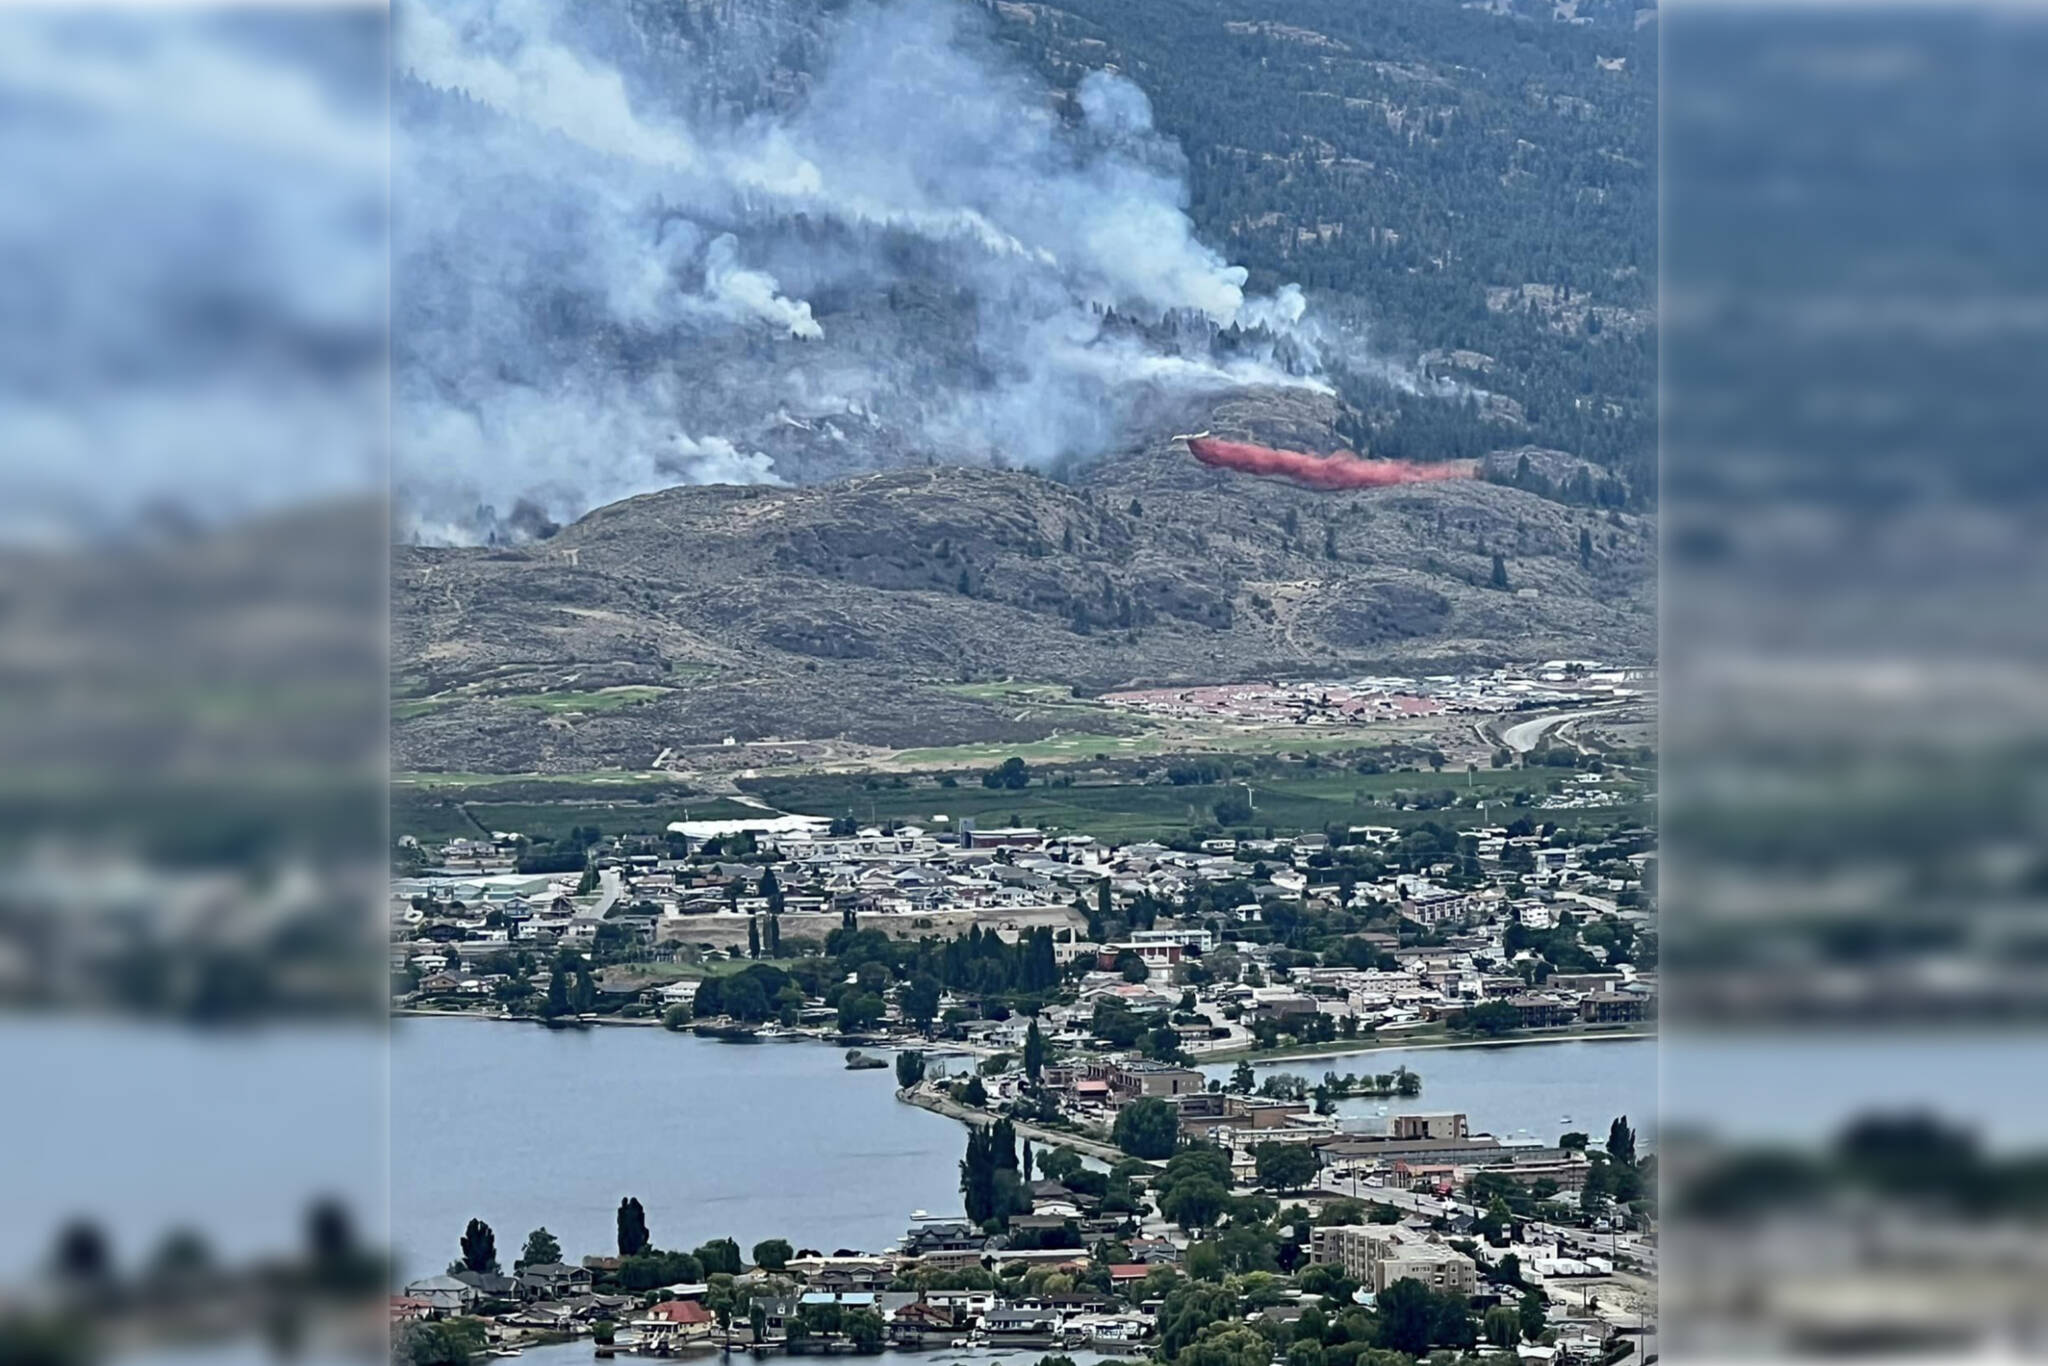 Air crews were busy dropping retardent on the flanks of the Eagle Bluff Wildfire on the edge of Osoyoos on July 30. The wildfire has grown dramatically since it first crossed the border on July 29. (Melissa Genberg - Facebook)